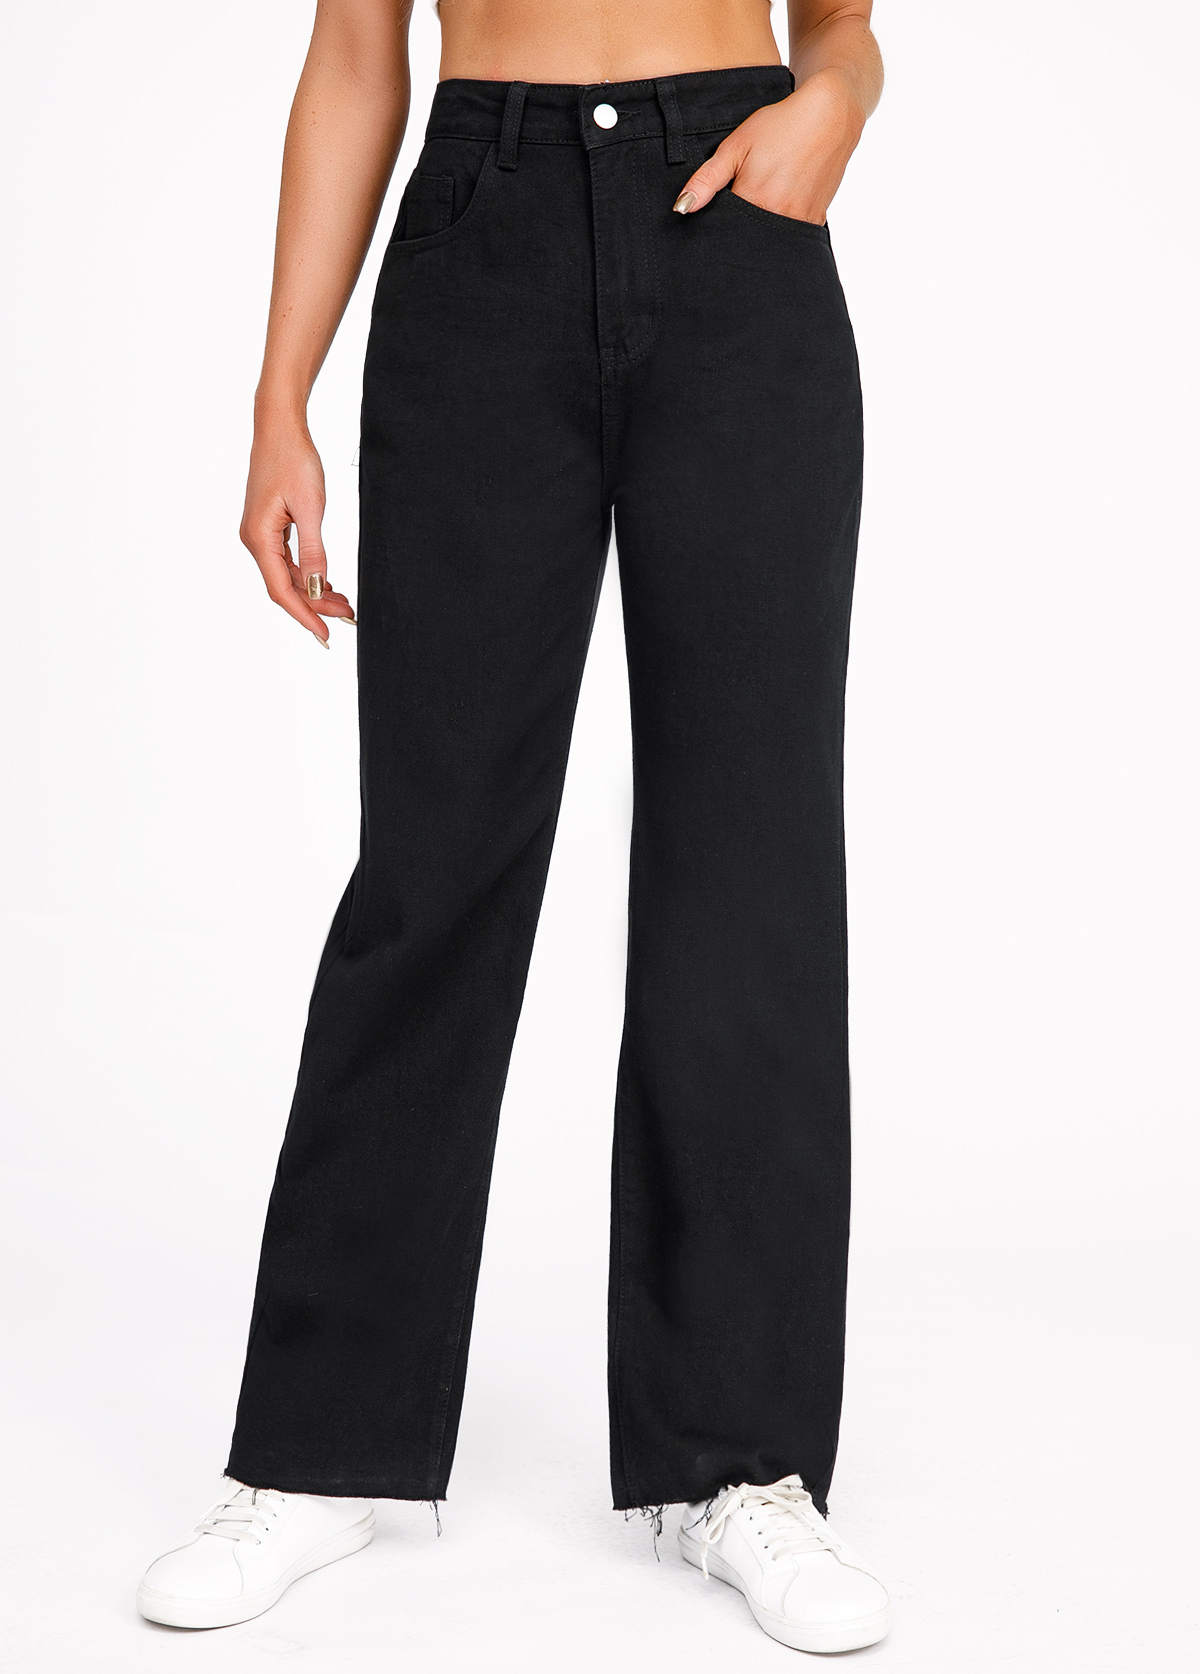 Black Button Fly High Waisted Pocket Jeans